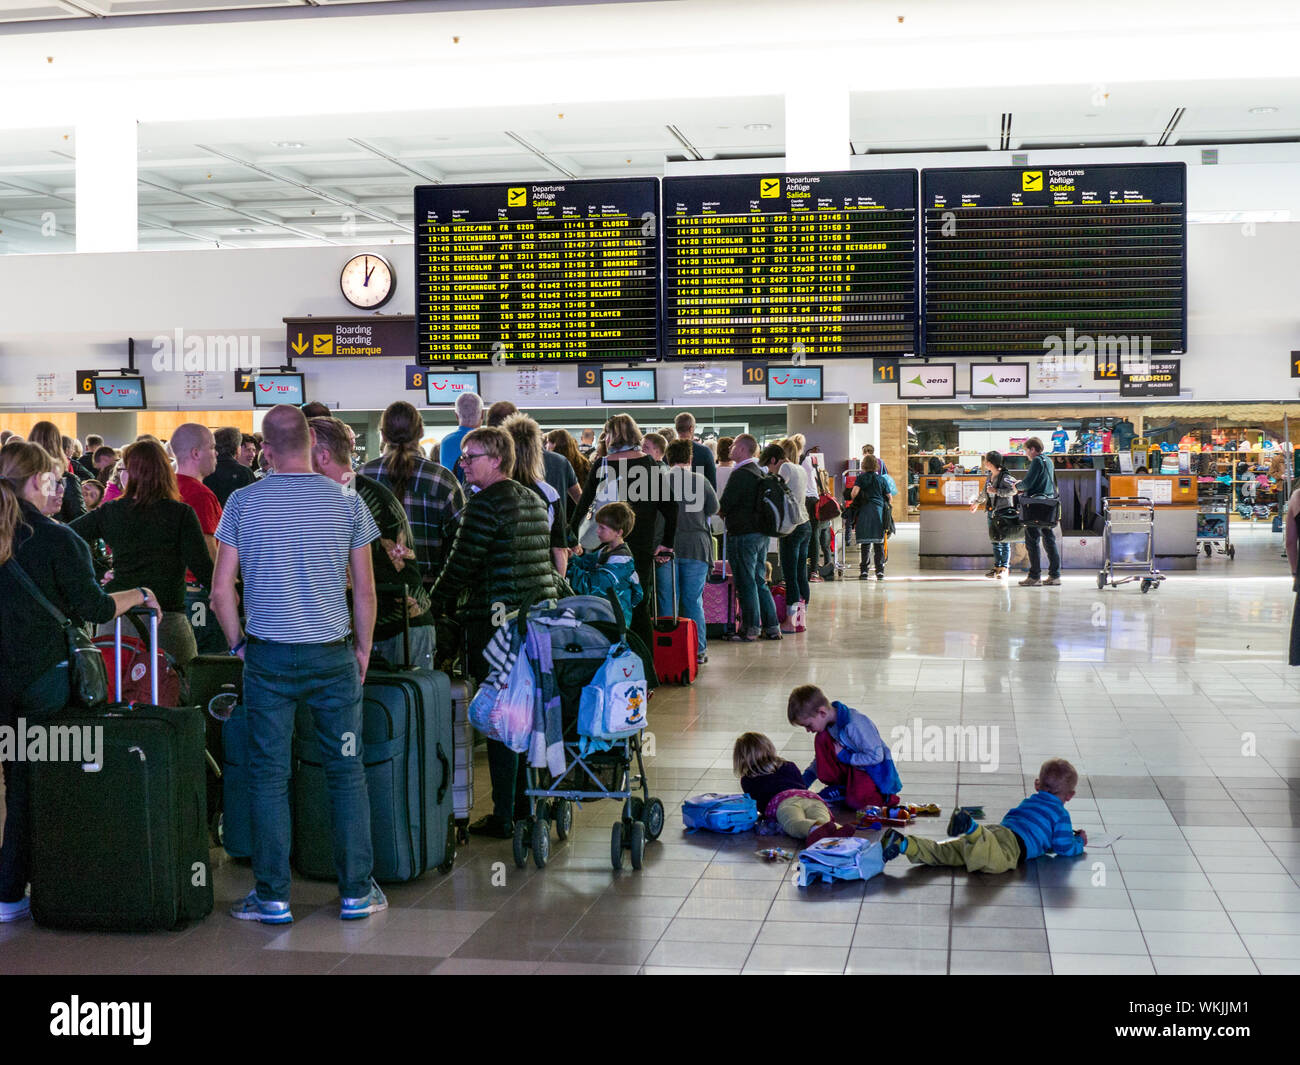 AIRPORT TUI CHECK-IN QUEUE QUEUES PASSENGERS BORED CHILDREN HOLIDAY FLIGHT DELAYS INFORMATION SCREENS QUEUES Delayed passenger queues of holiday charter flight passengers and luggage wait at airport terminal to check in baggage to their flight Spain Stock Photo